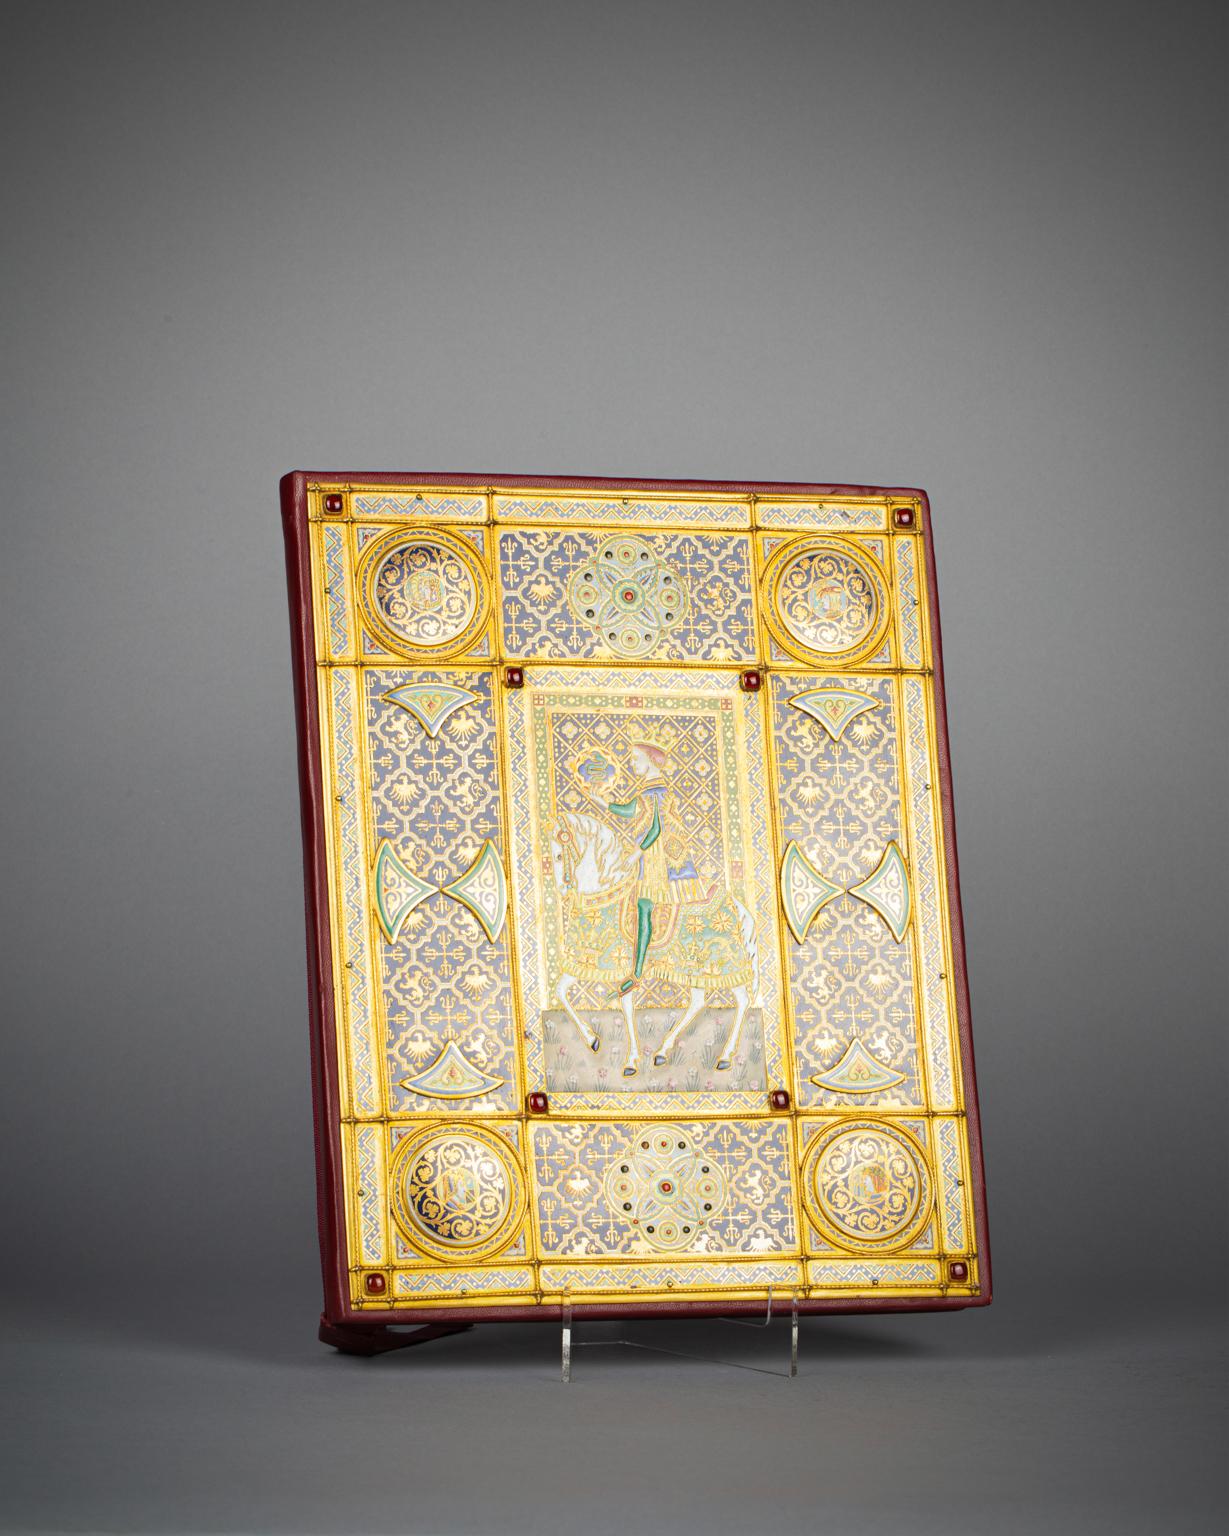 American E.F. Caldwell Champlevé Enamel and Jeweled Folio Cover, Early 20th Century For Sale